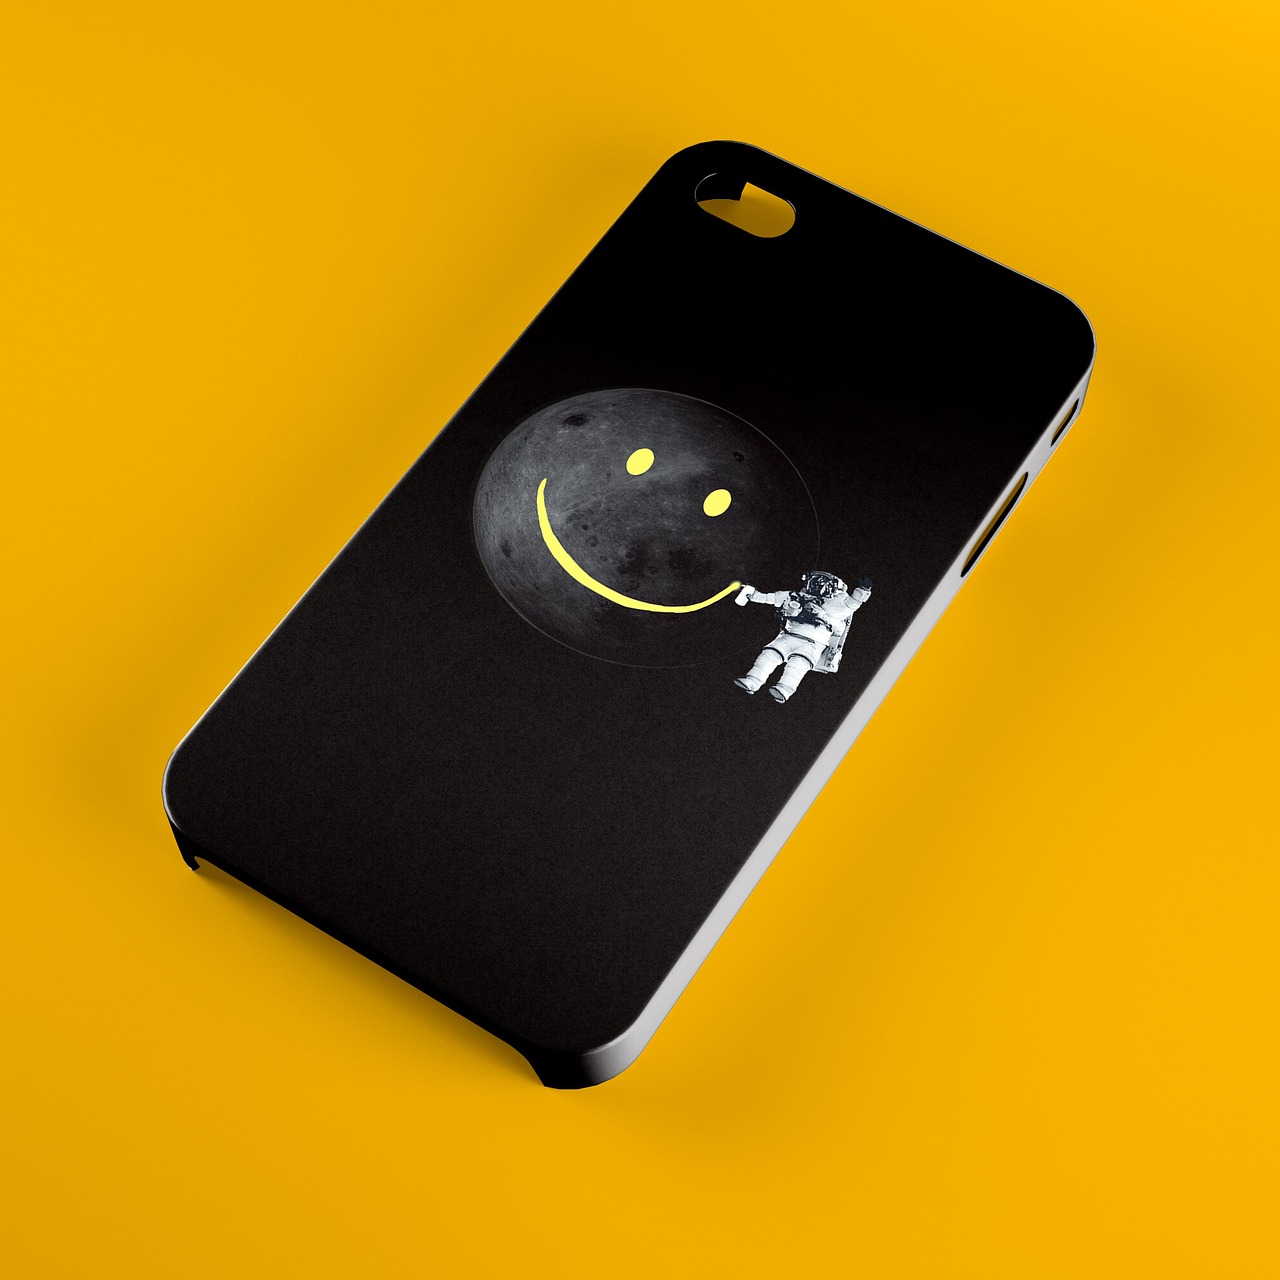 smiley face moon mobile phone shell free photo